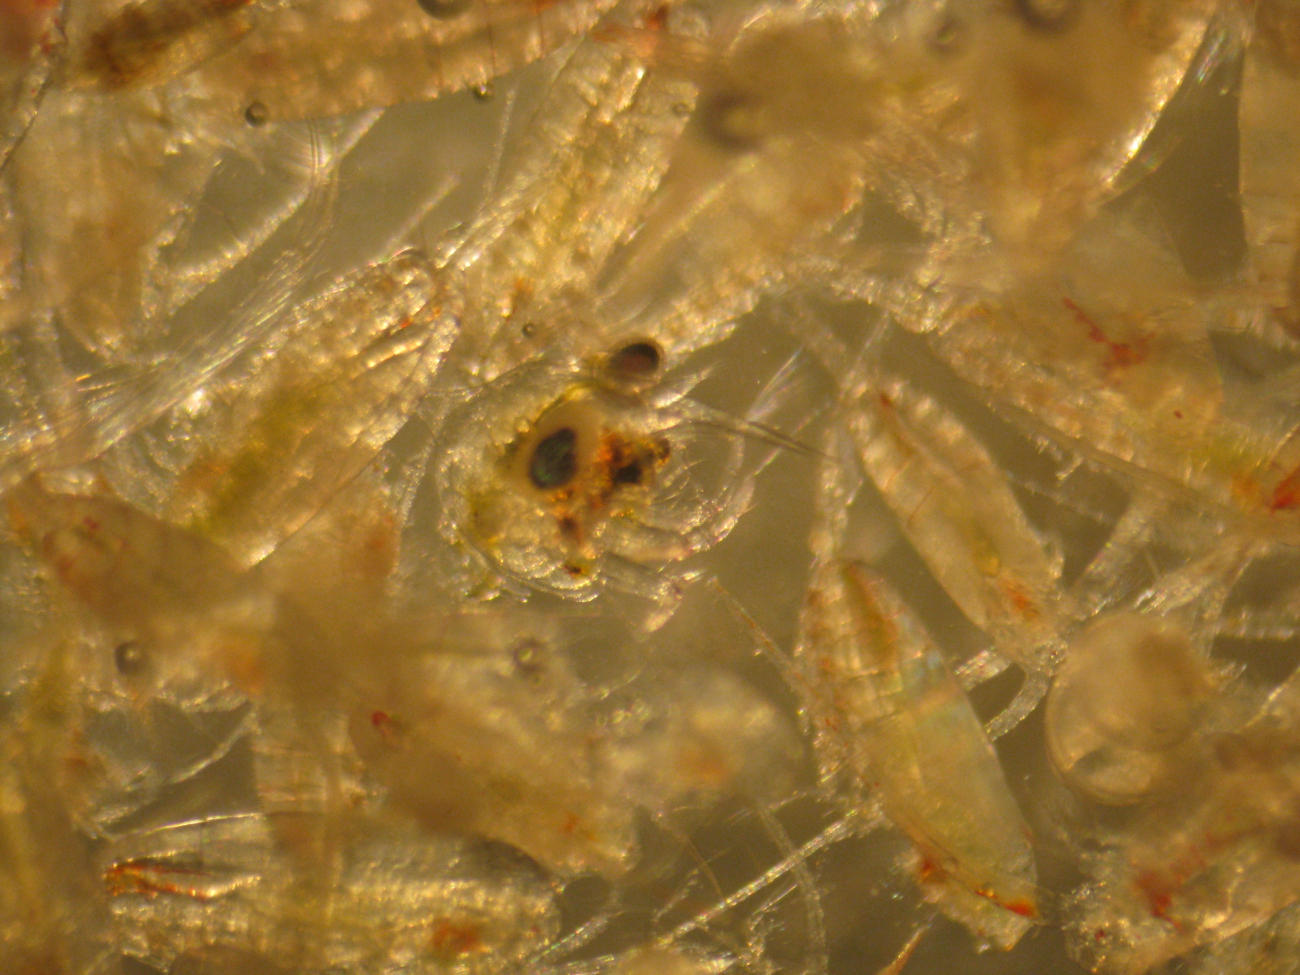 Through the microscope - copepods and crab larva (maybe)